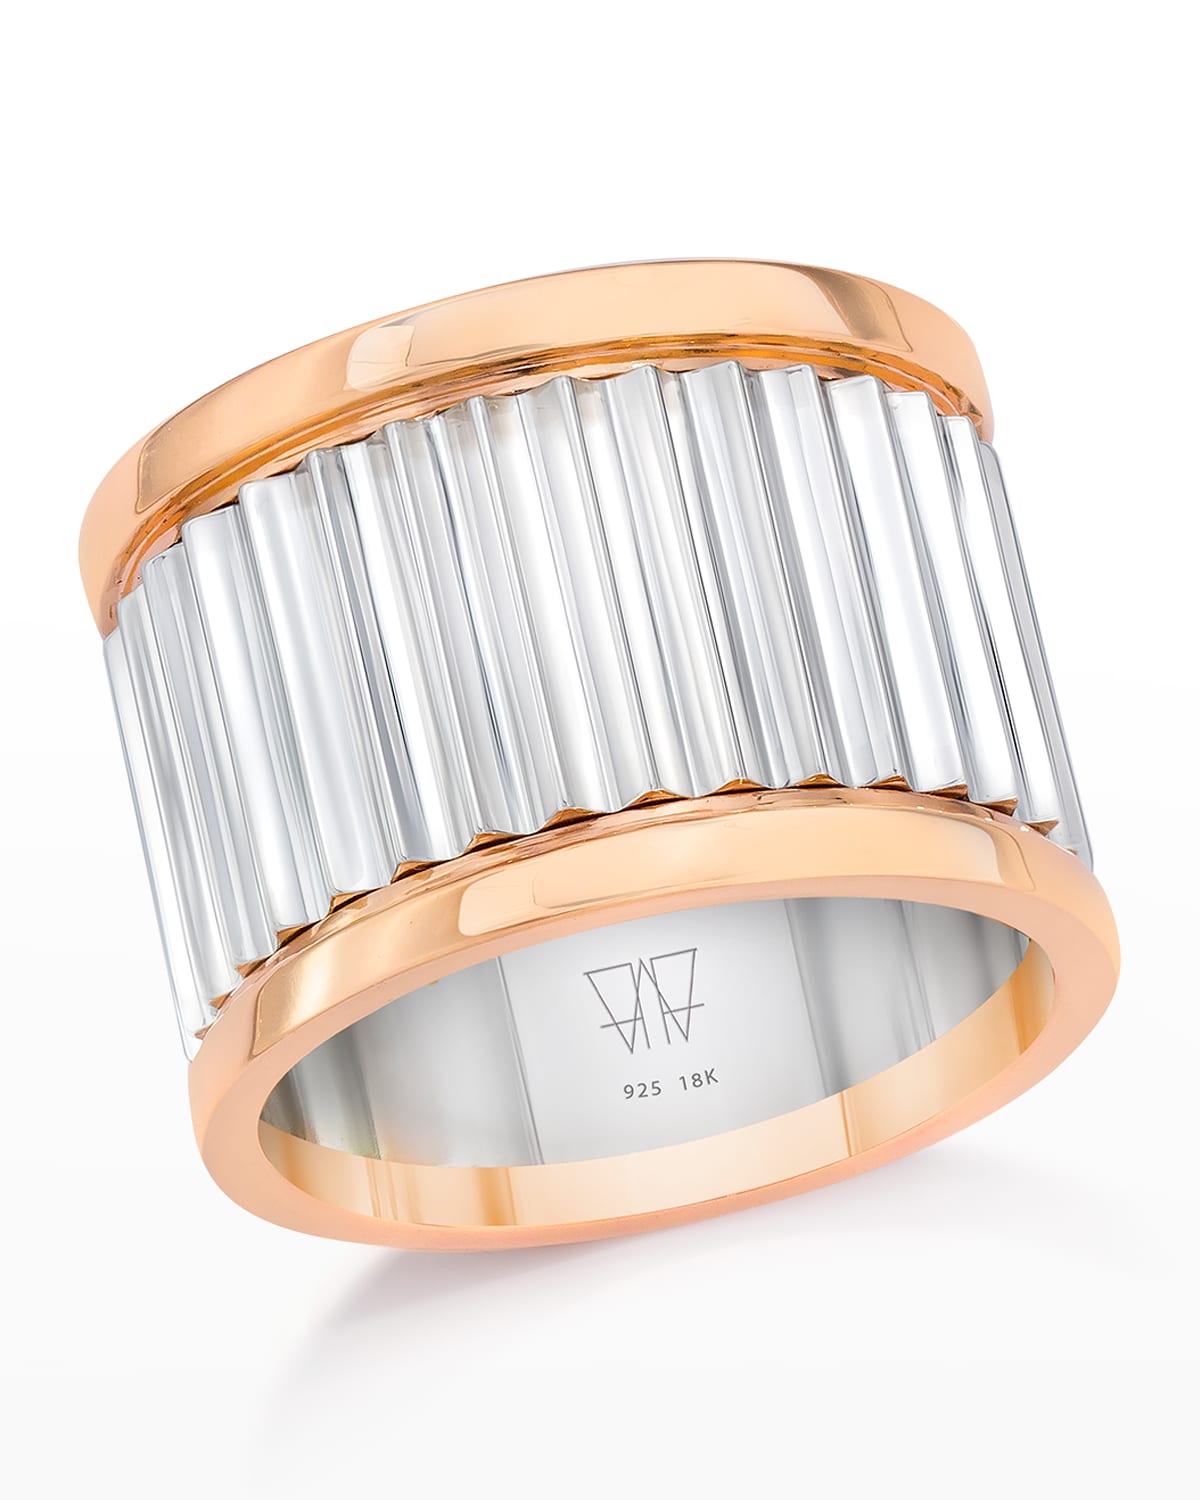 Walters Faith Clive Sterling Silver Wide Fluted Band Ring With Rose Gold Rails Size 6